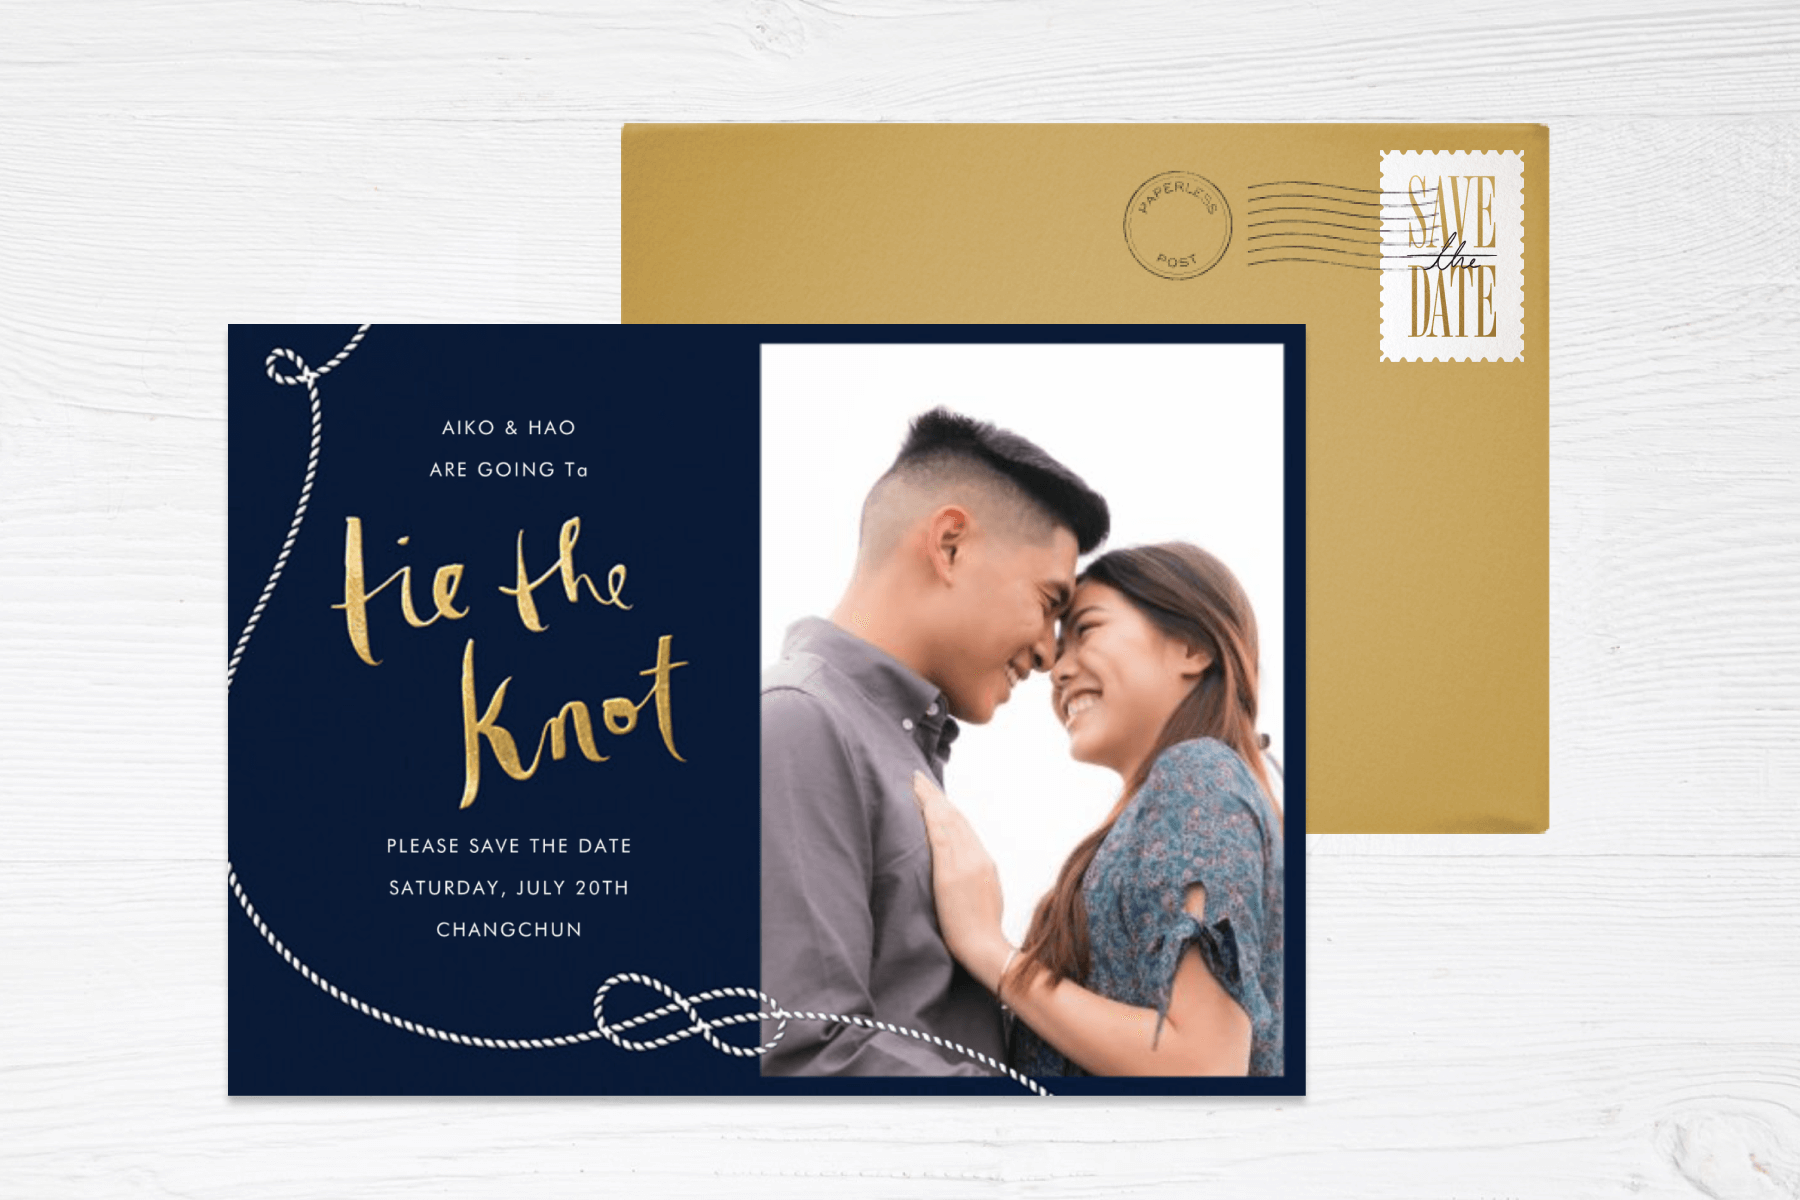 A nautical-themed save the date with a navy background and the phrase “Tie the knot” in gold lettering, plus an illustration of a knotted rope and a photo of a couple smiling at each other.